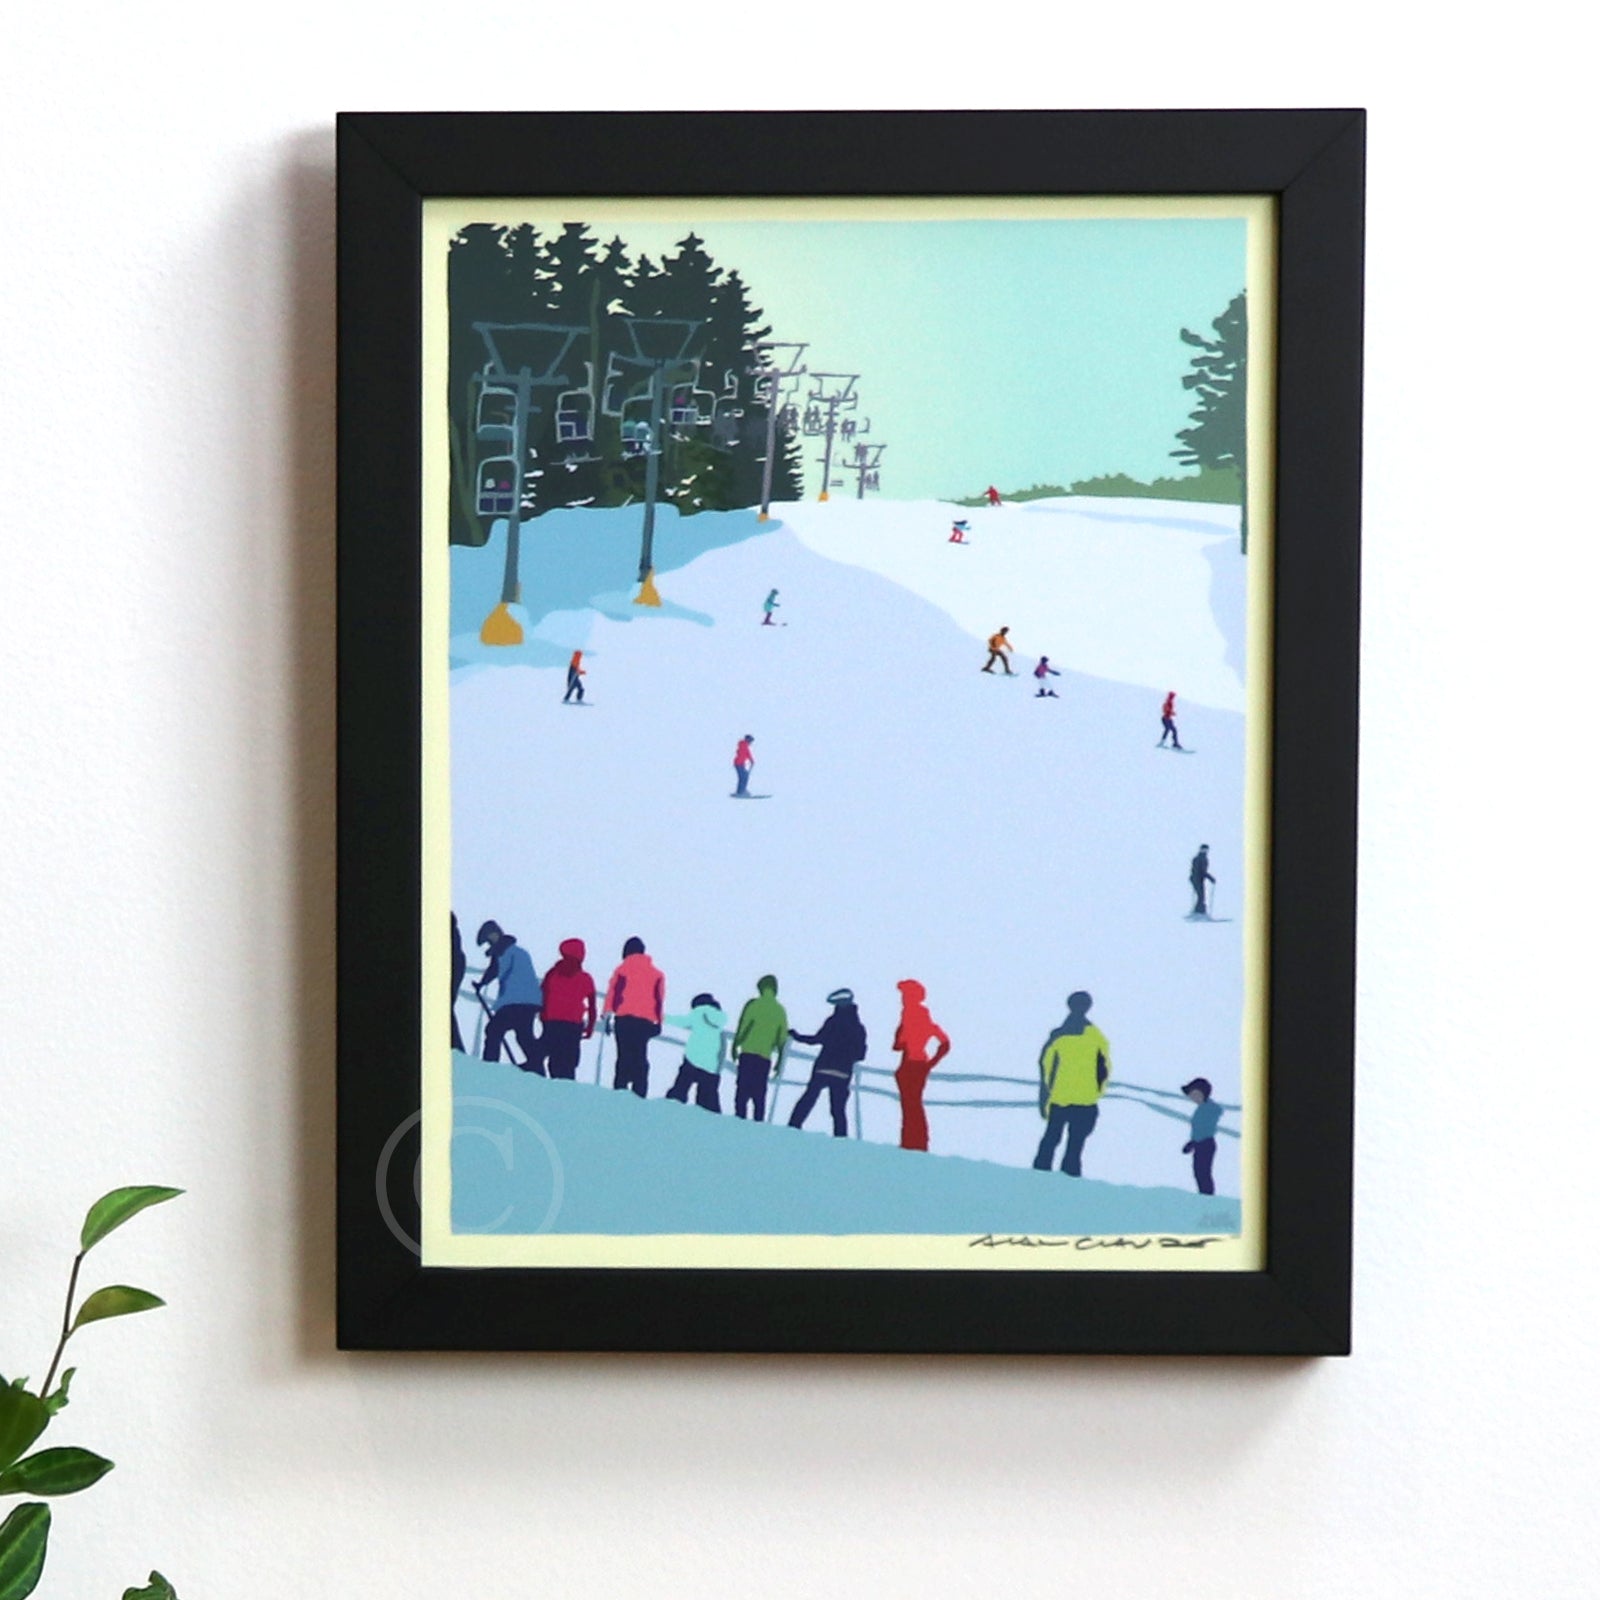 Skiing Snow Bowl Art Print 8" x 10" Framed Wall Poster By Alan Claude - Maine